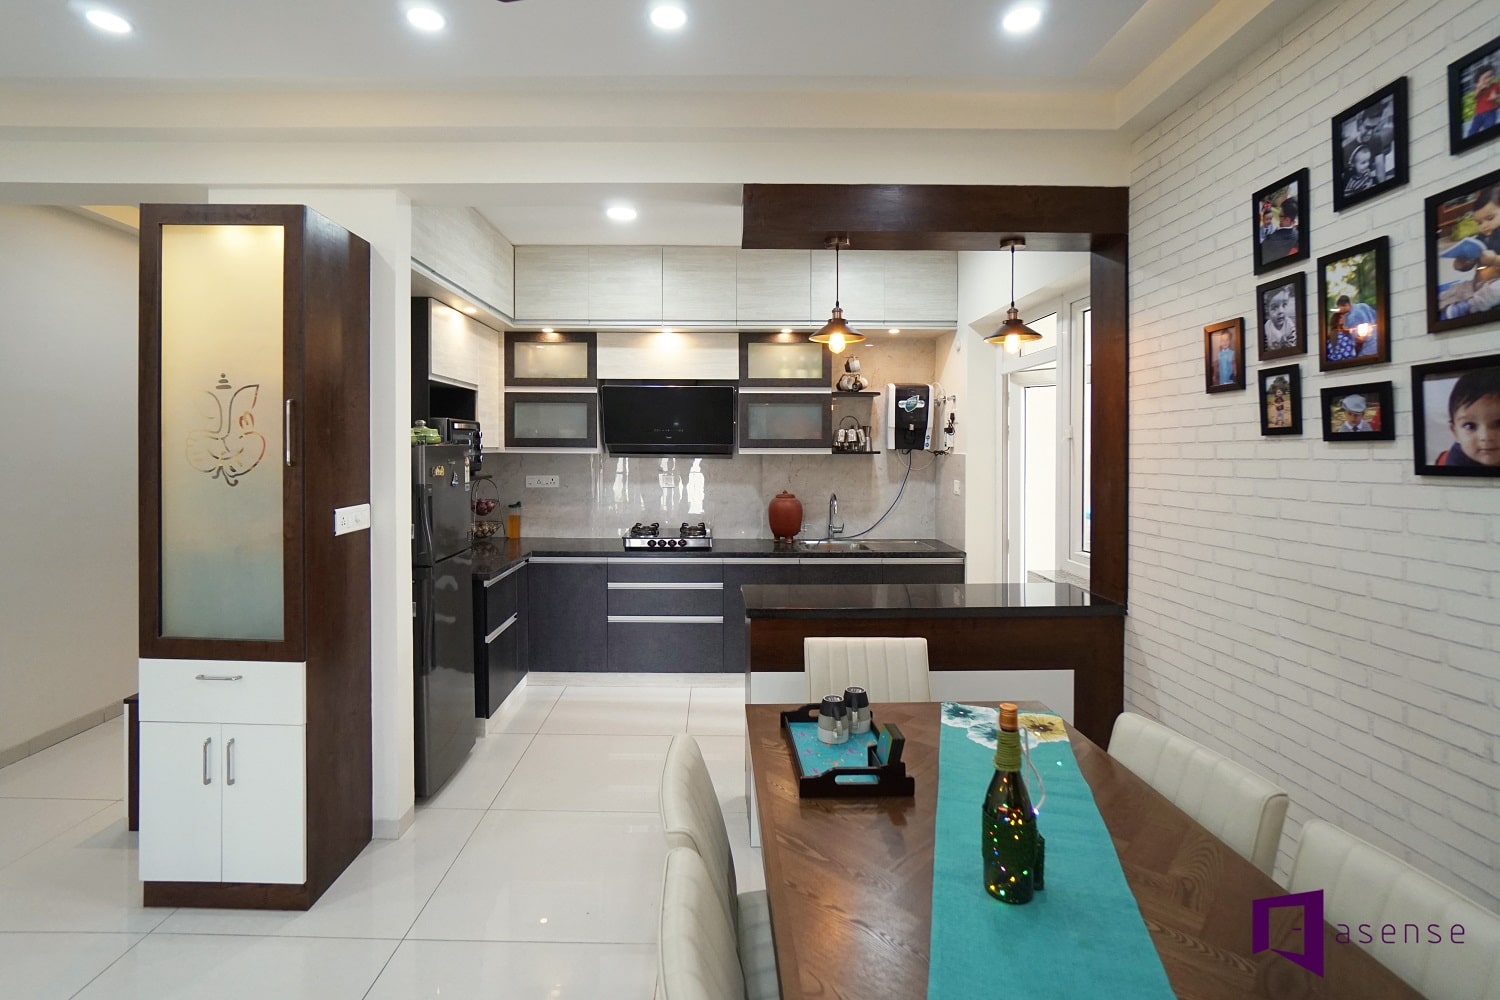 Things to remember while making modular kitchen for your home